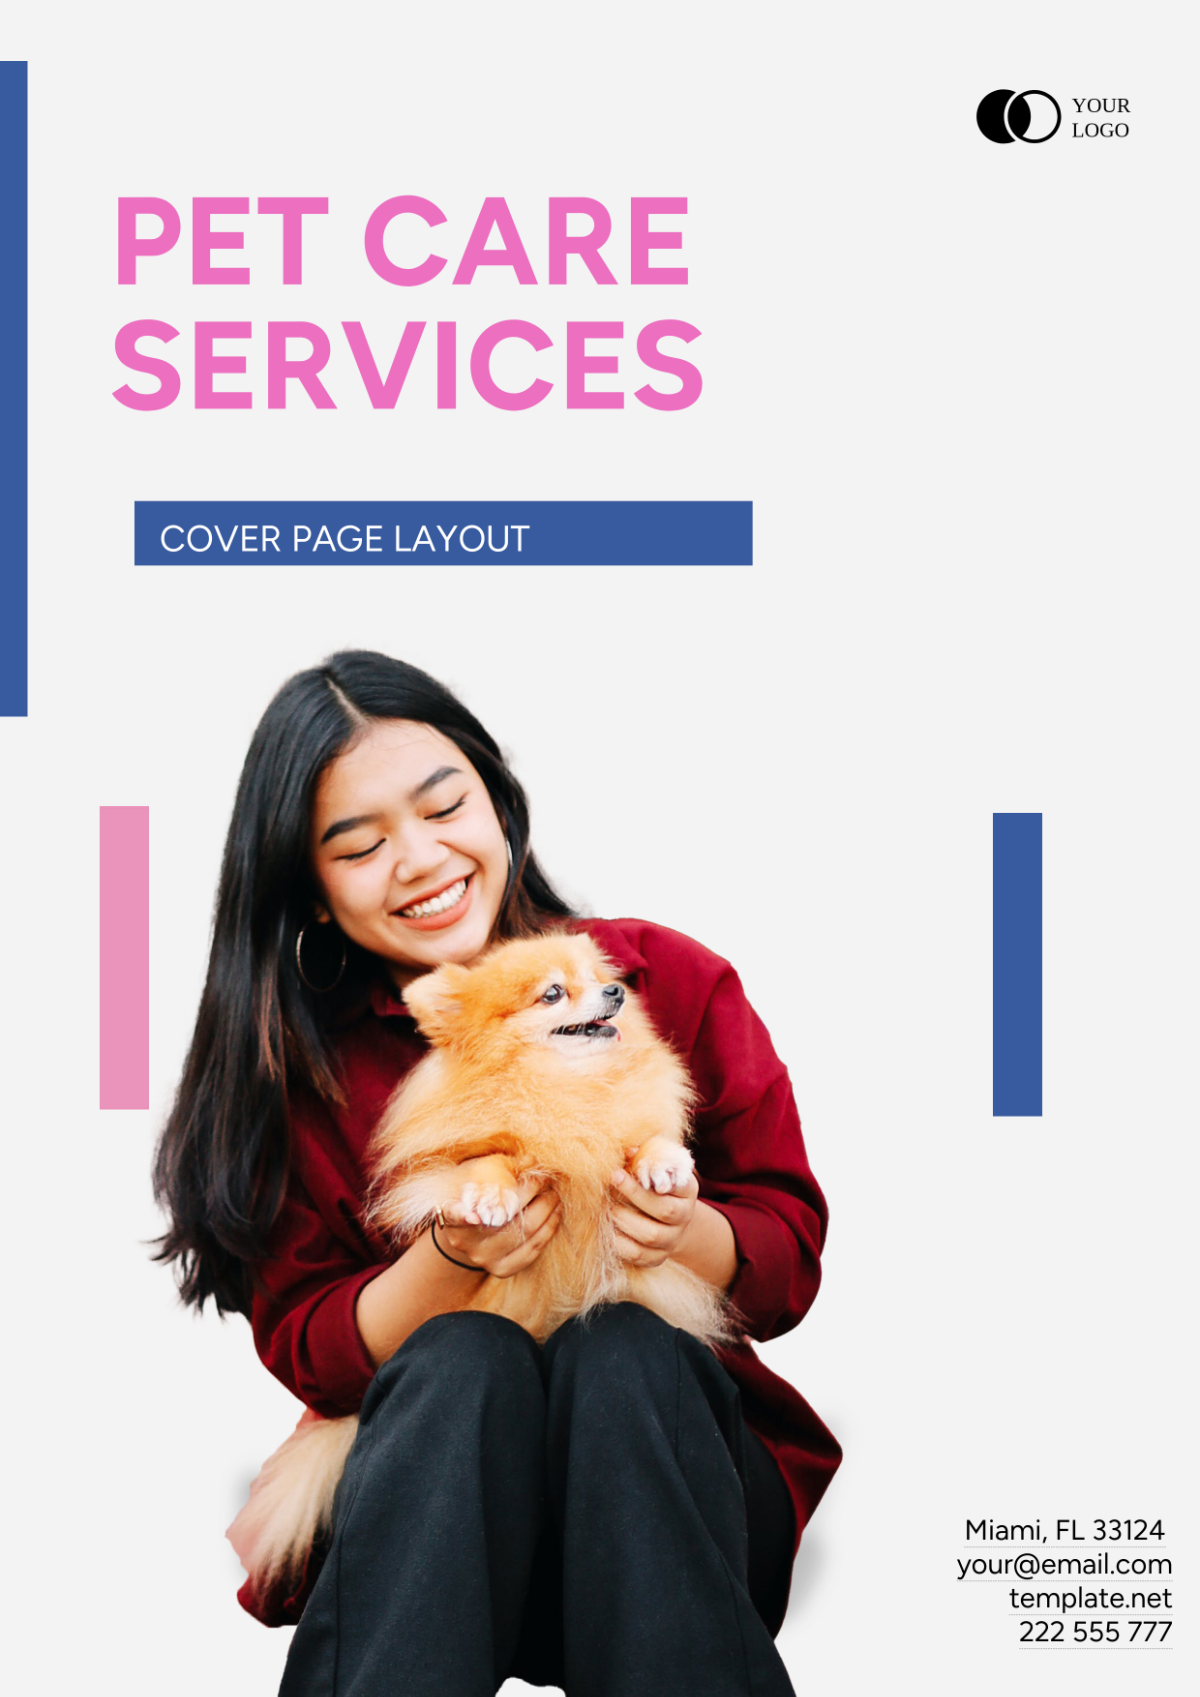 Pet Care Services Cover Page Layout Template